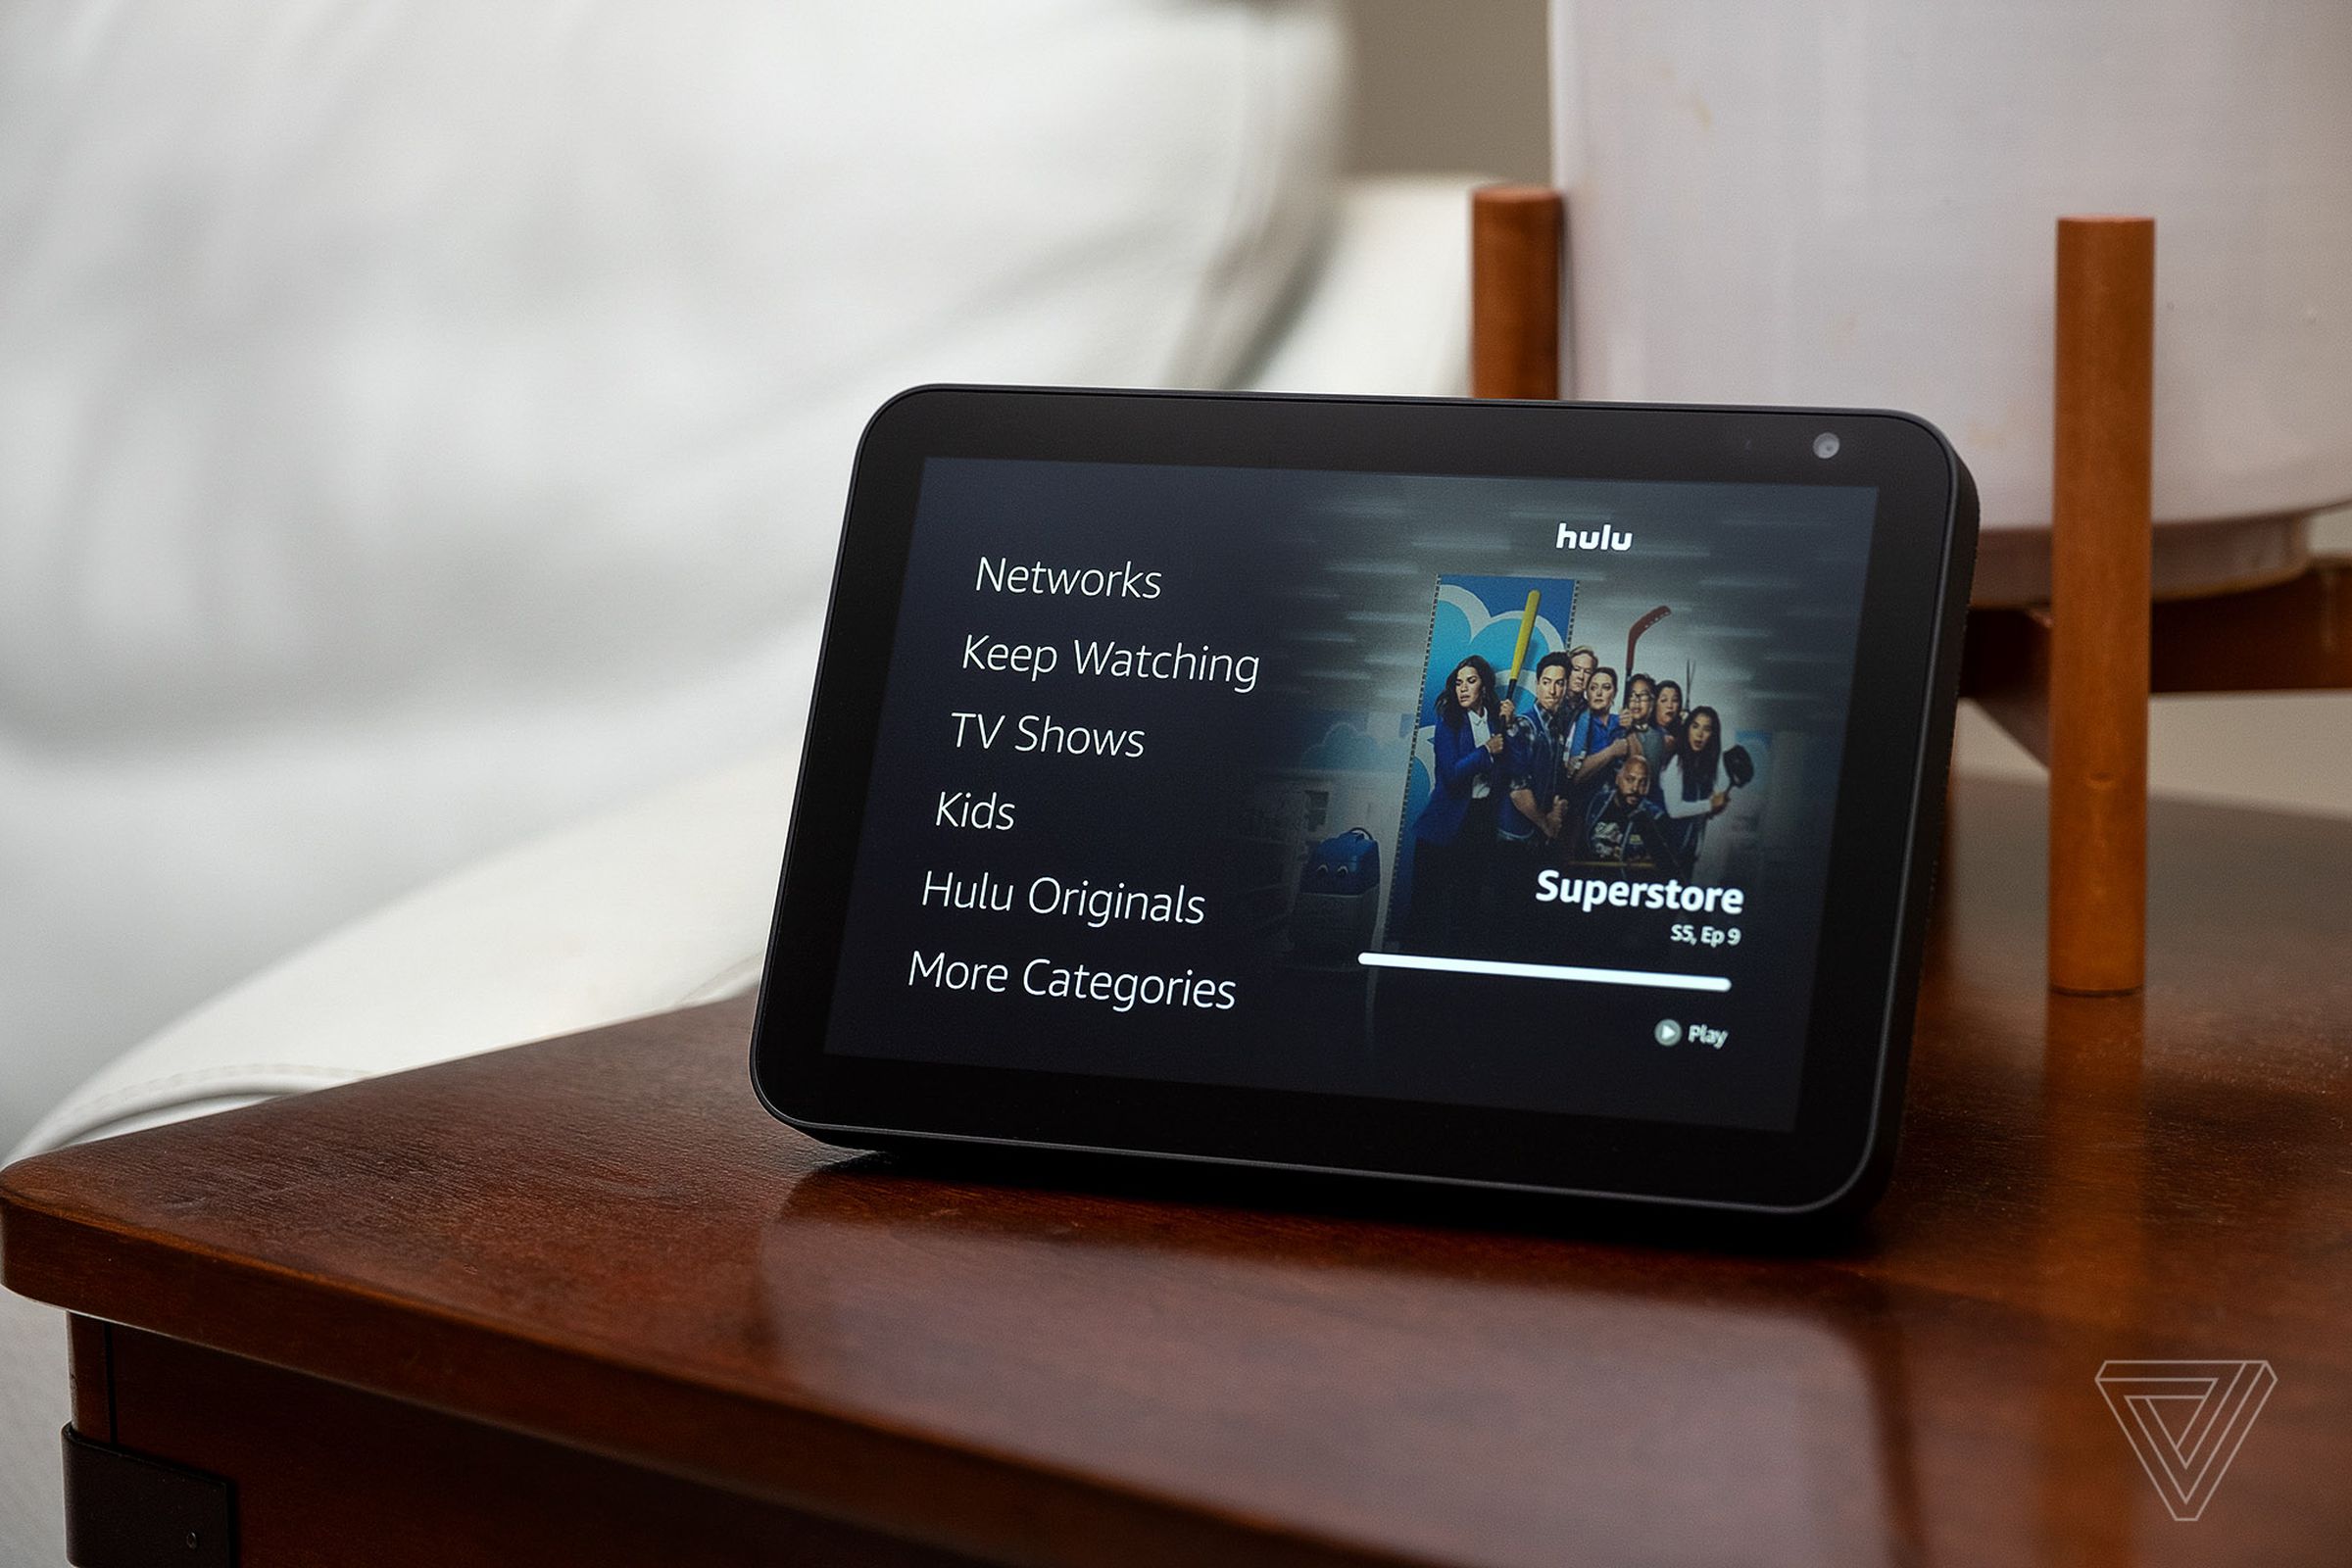 The Echo Show 8 has an eight-inch display and a camera for video chatting.